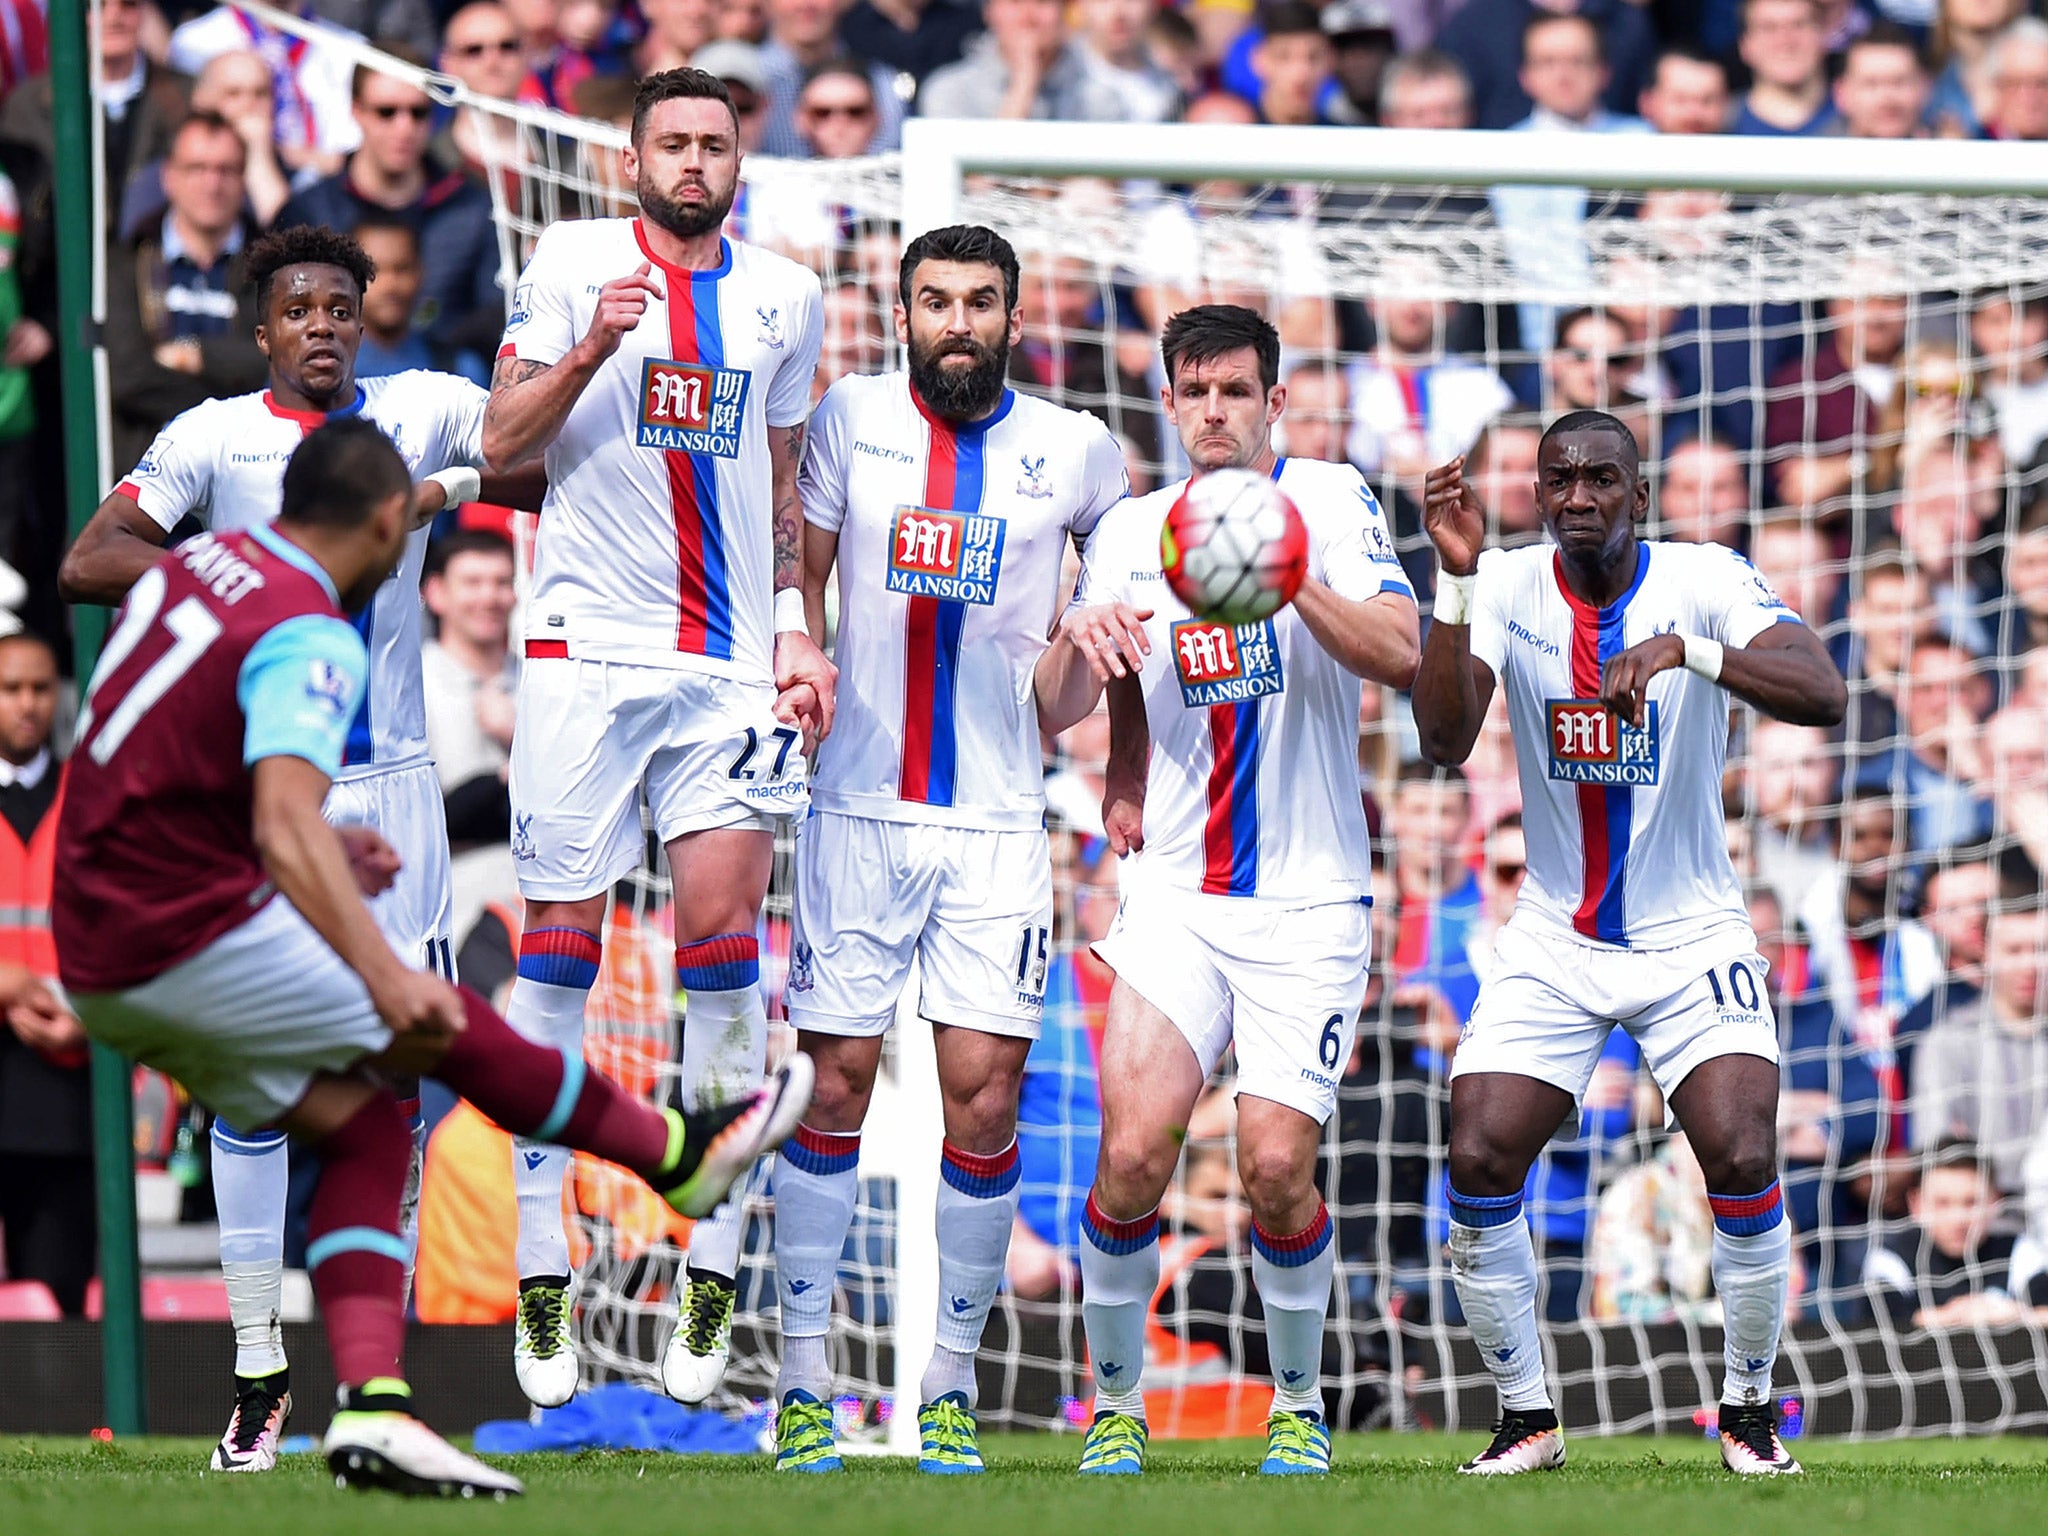 Dimitri Payet curls in a beautiful free-kick to give West Ham a 2-1 lead